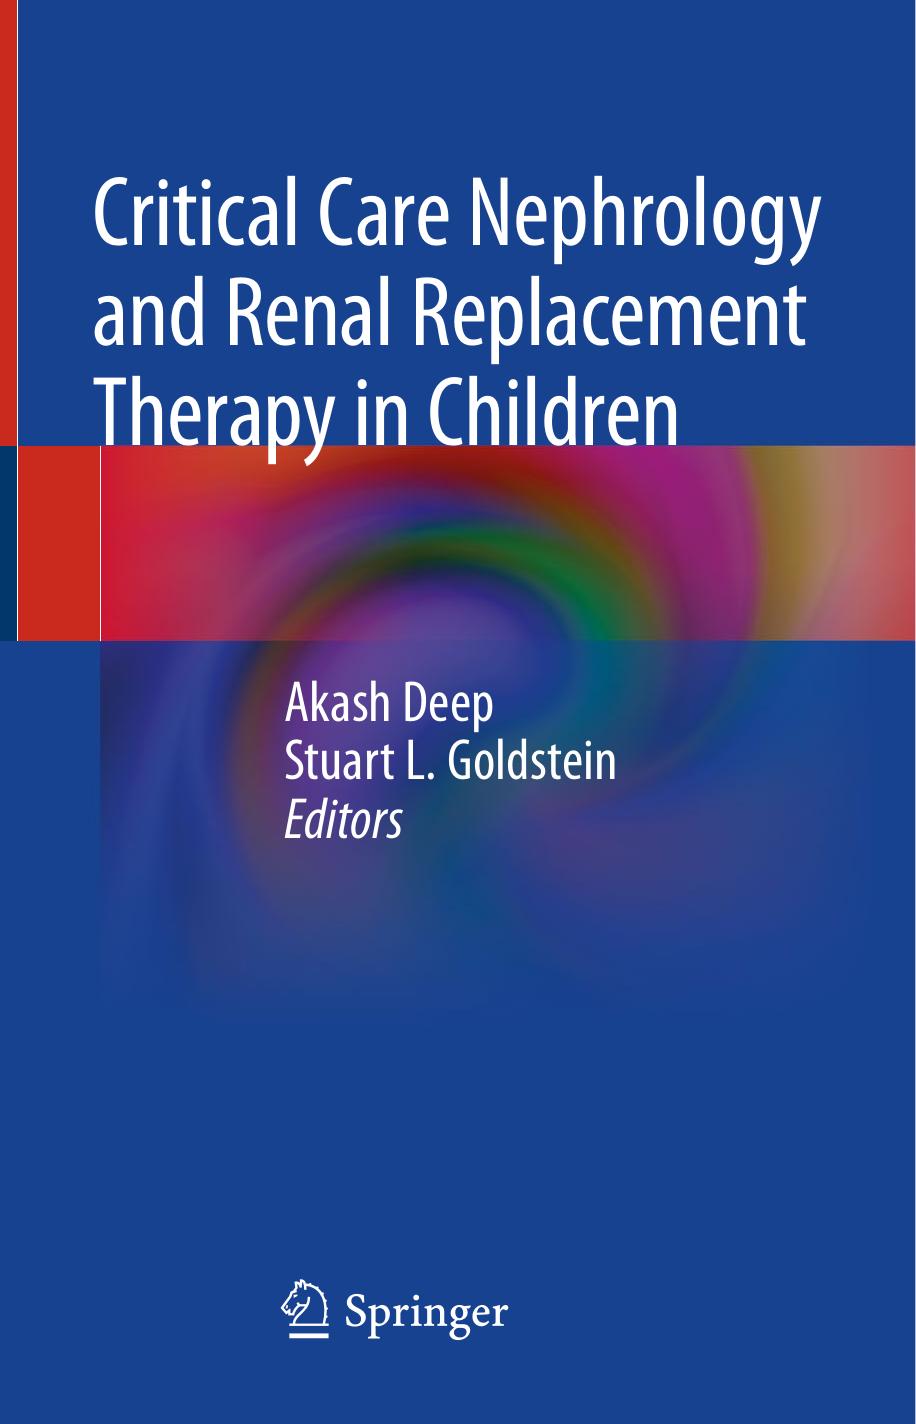 Critical Care Nephrology and Renal Replacement Therapy in Children 2018